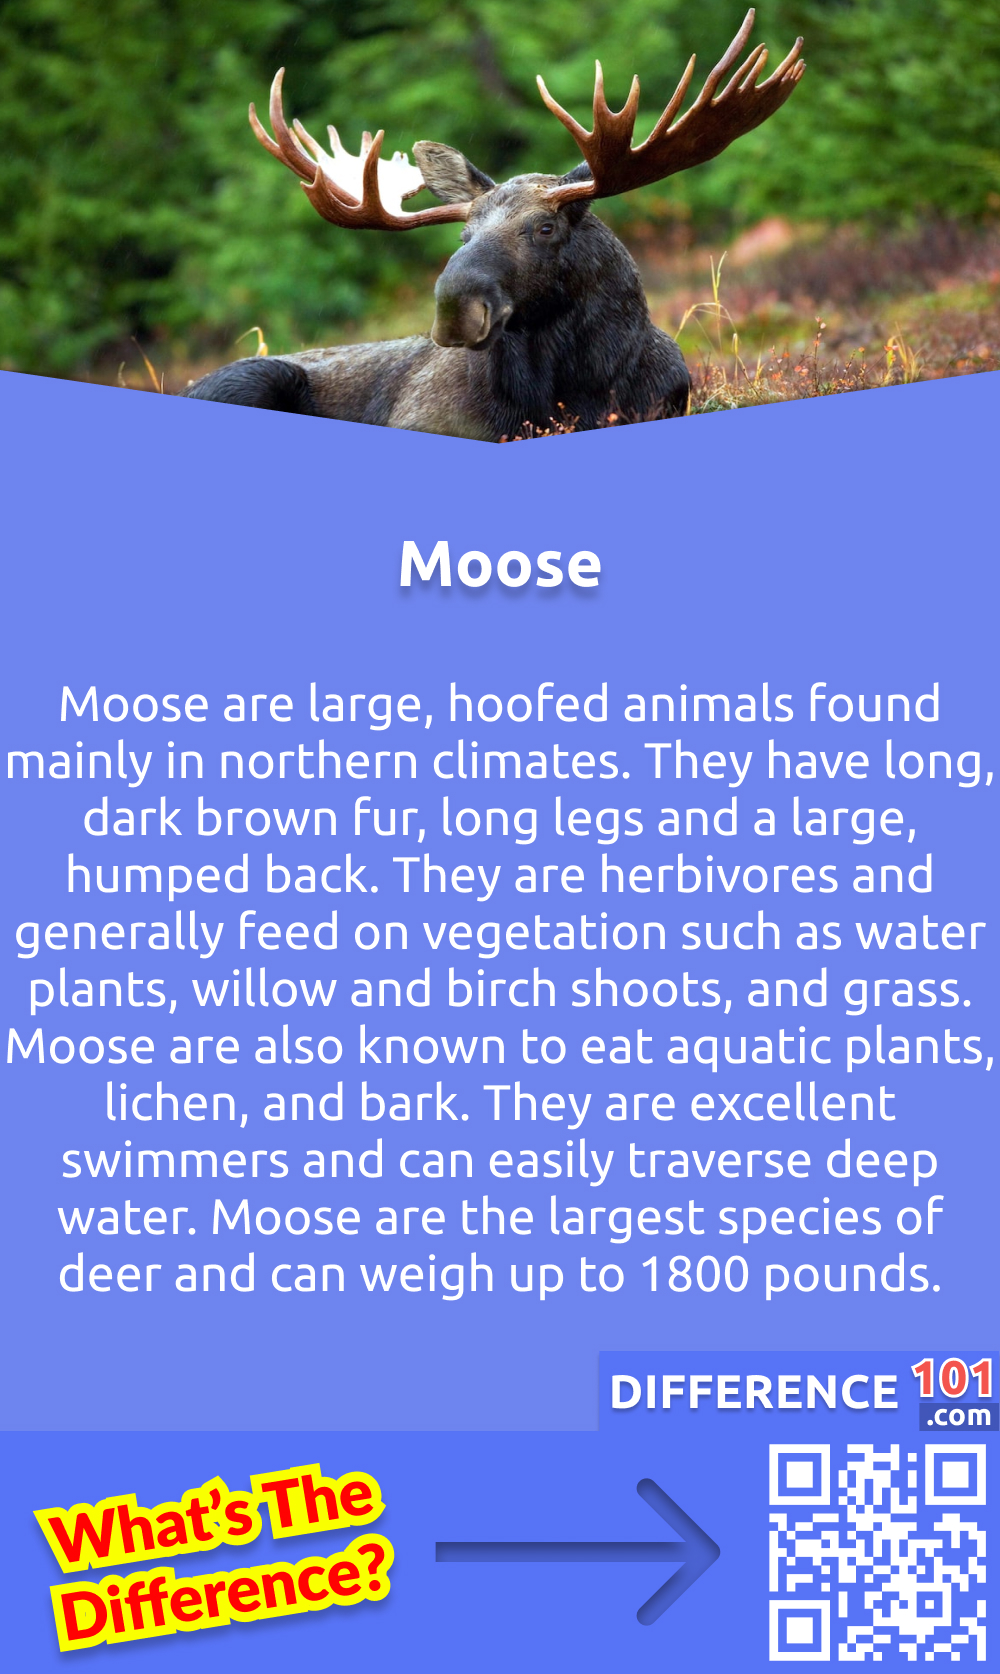 What Is Moose? Moose are large, hoofed animals found mainly in northern climates. They have long, dark brown fur, long legs and a large, humped back. They are herbivores and generally feed on vegetation such as water plants, willow and birch shoots, and grass. Moose are also known to eat aquatic plants, lichen, and bark. They are excellent swimmers and can easily traverse deep water. Moose are the largest species of deer and can weigh up to 1800 pounds. They are solitary animals and usually travel alone or in small groups. Moose are a symbol of strength, resilience, and the natural world. They are an important part of some cultures, appearing in various artworks, stories and religious ceremonies.